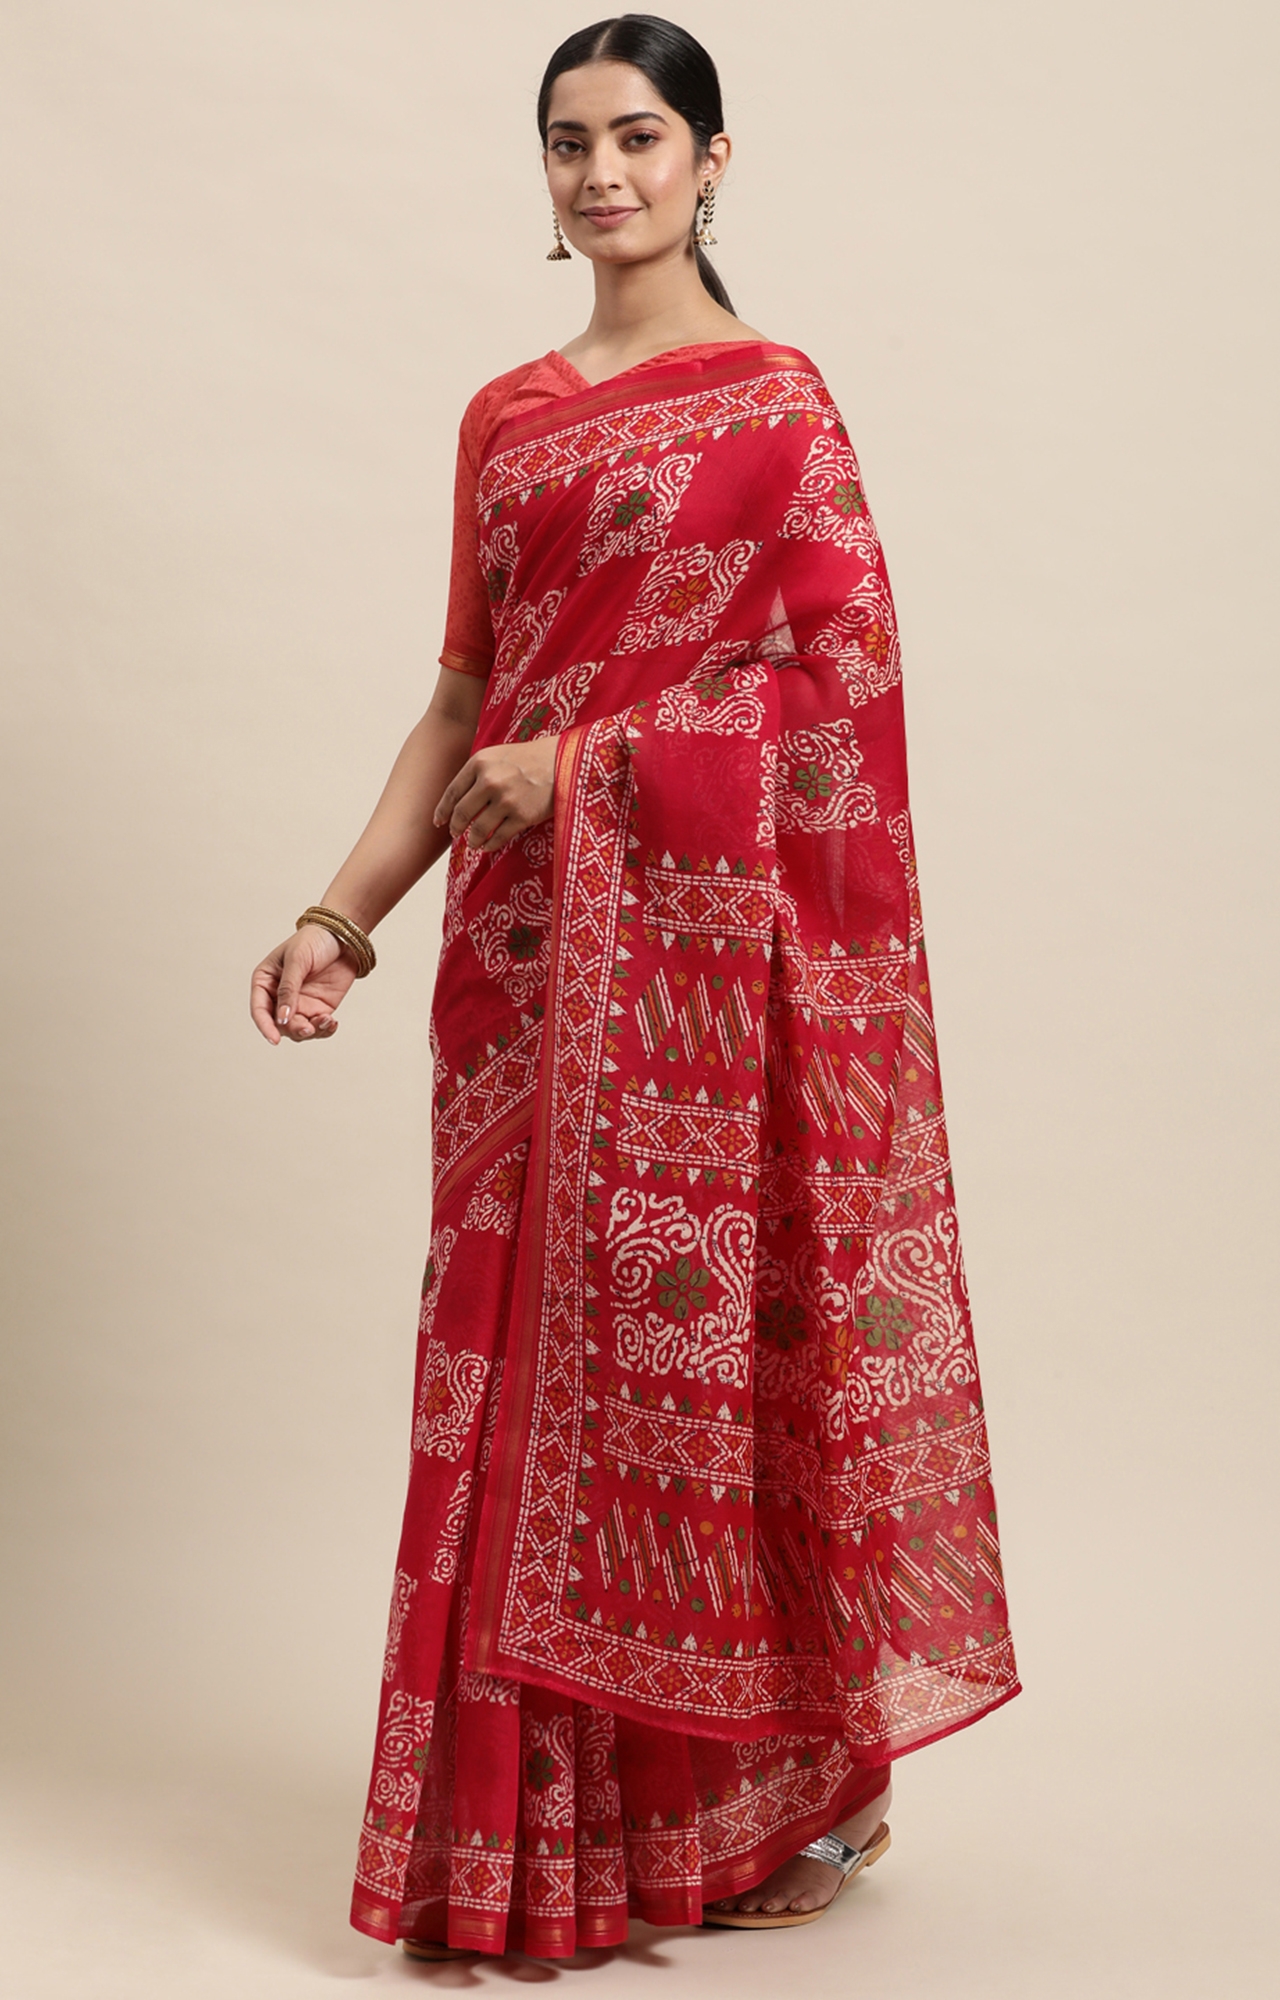 Shaily Women's Red Cotton Linen Blend Printed Saree-HACTN0009RED